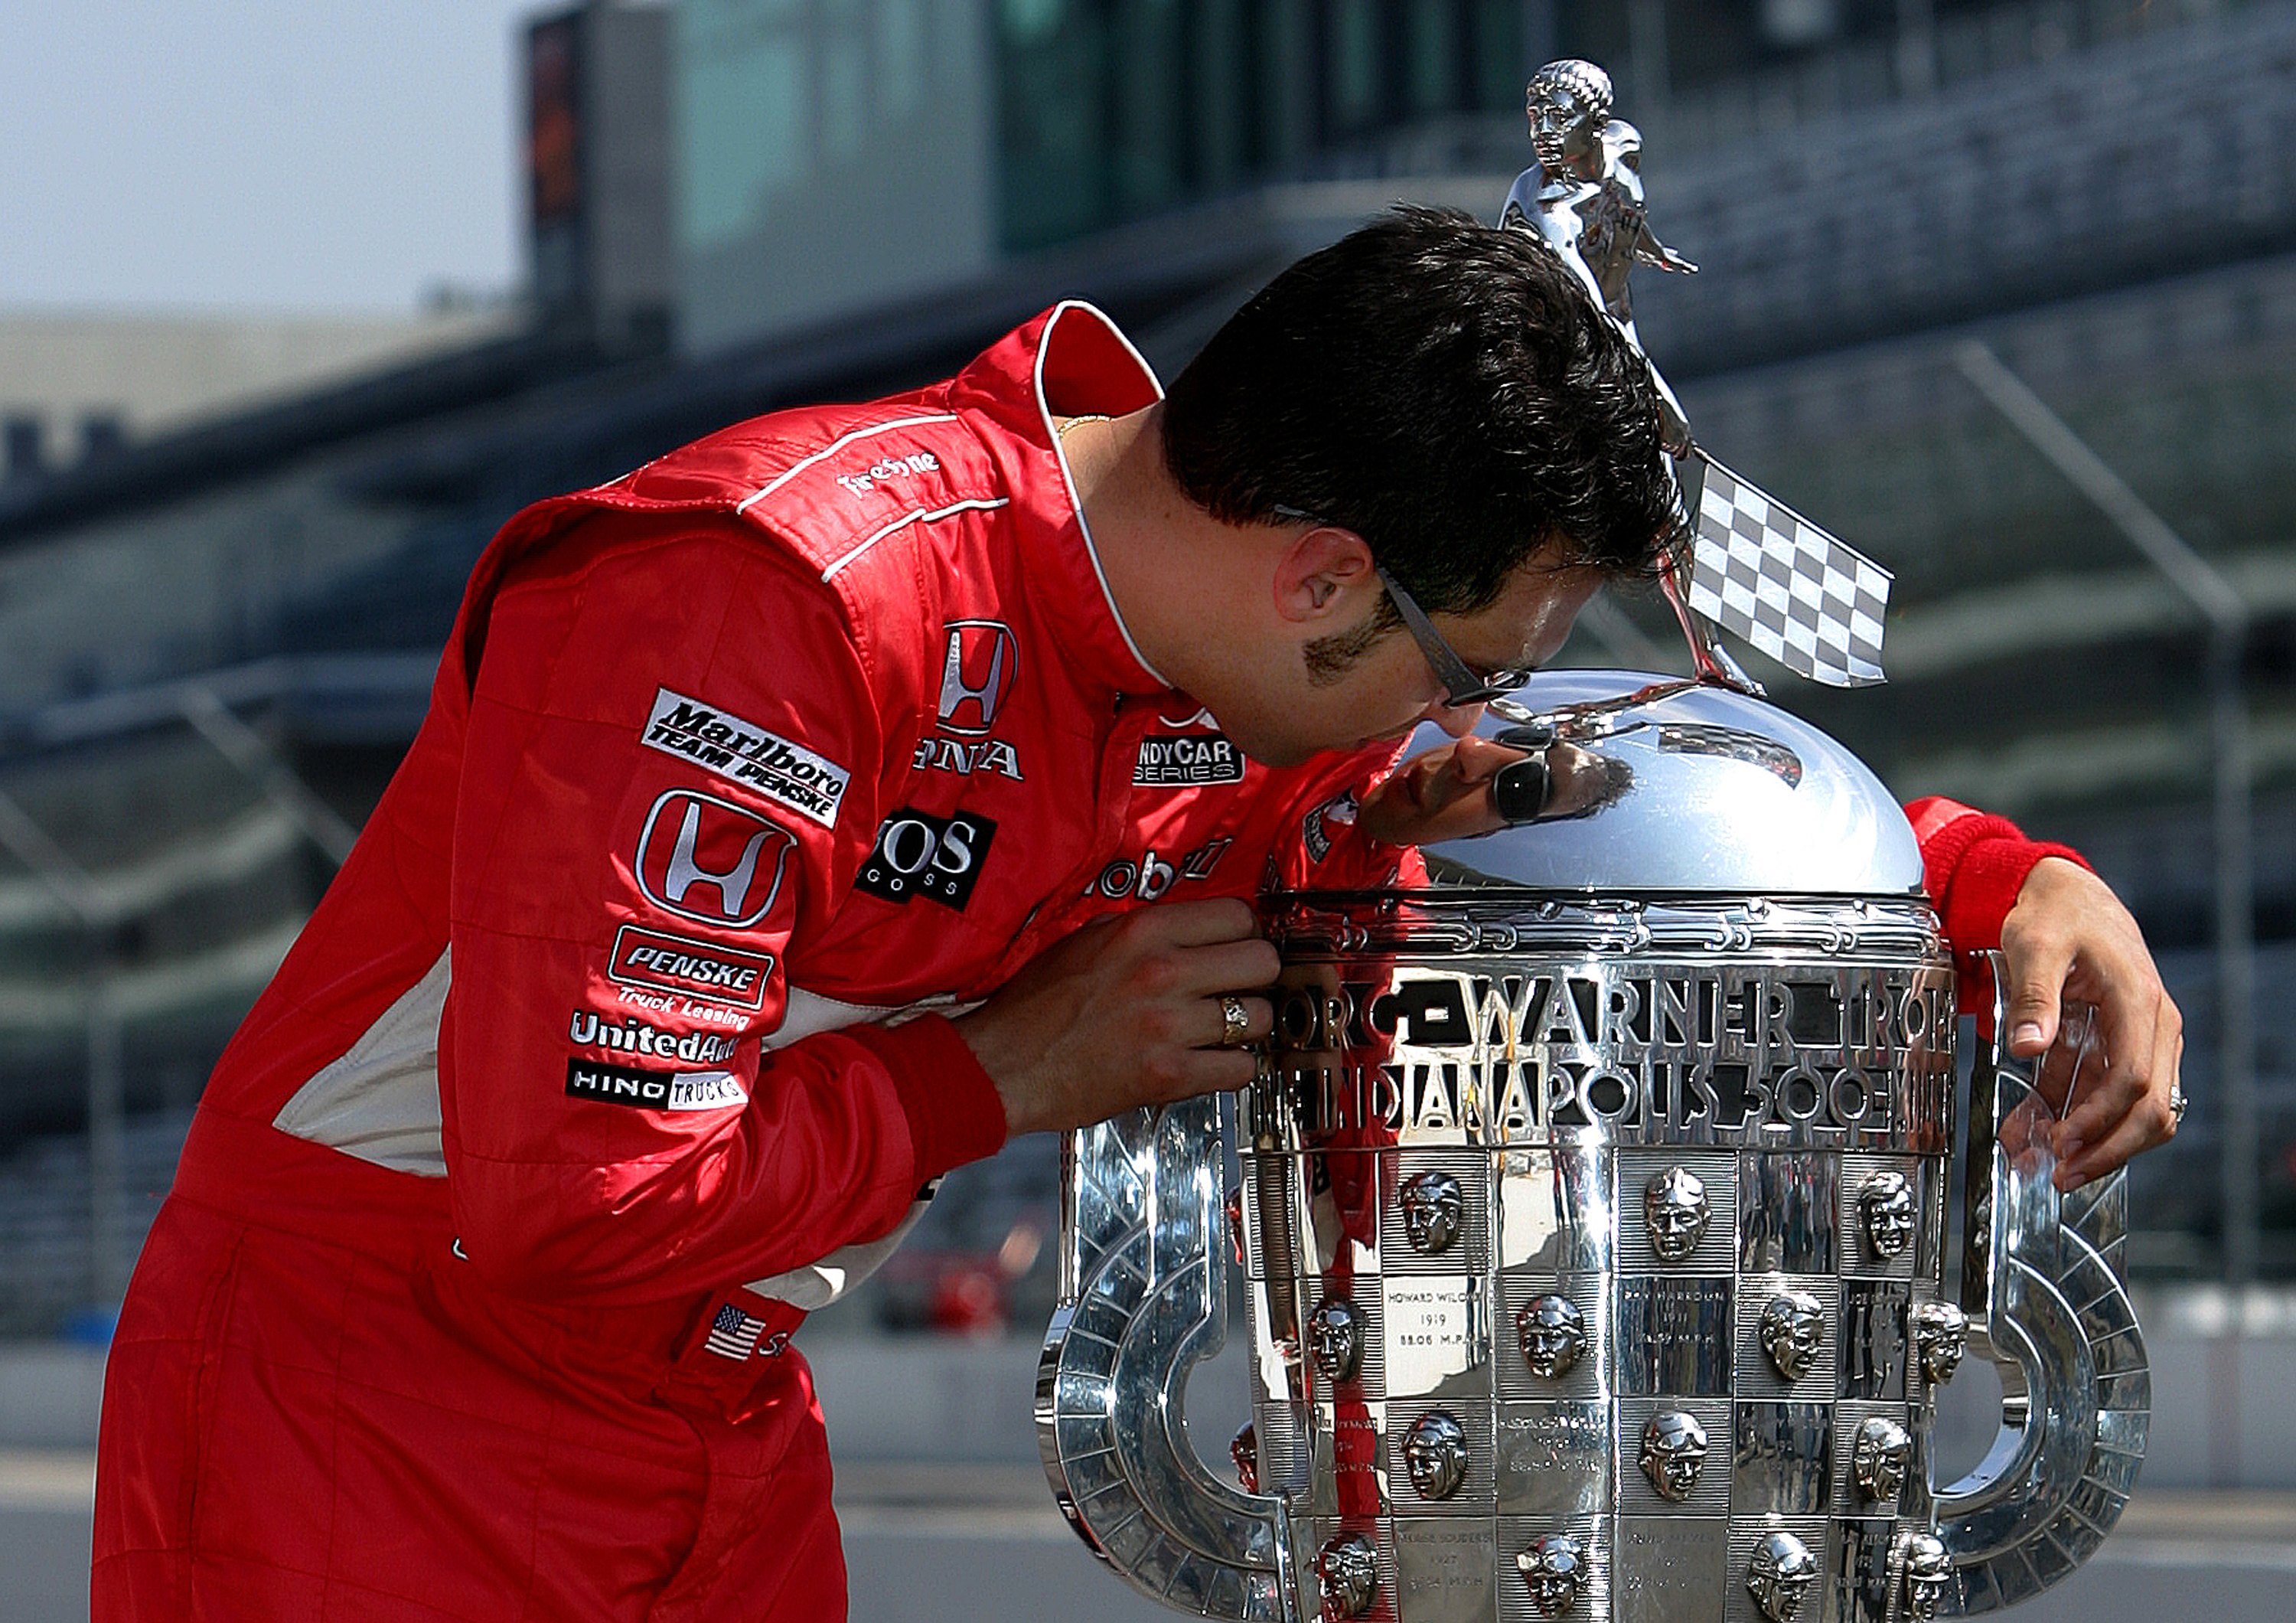 INDIANAPOLIS - MAY 29:  Sam Hornish Jr., driver of the #6 Marlboro Team Penske Dallara Honda, kisses the trophy during the Official Borg Warner Trophy presentation for the IRL IndyCar Series 90th running of the Indianapolis 500 on May 29, 2006 at the Indi